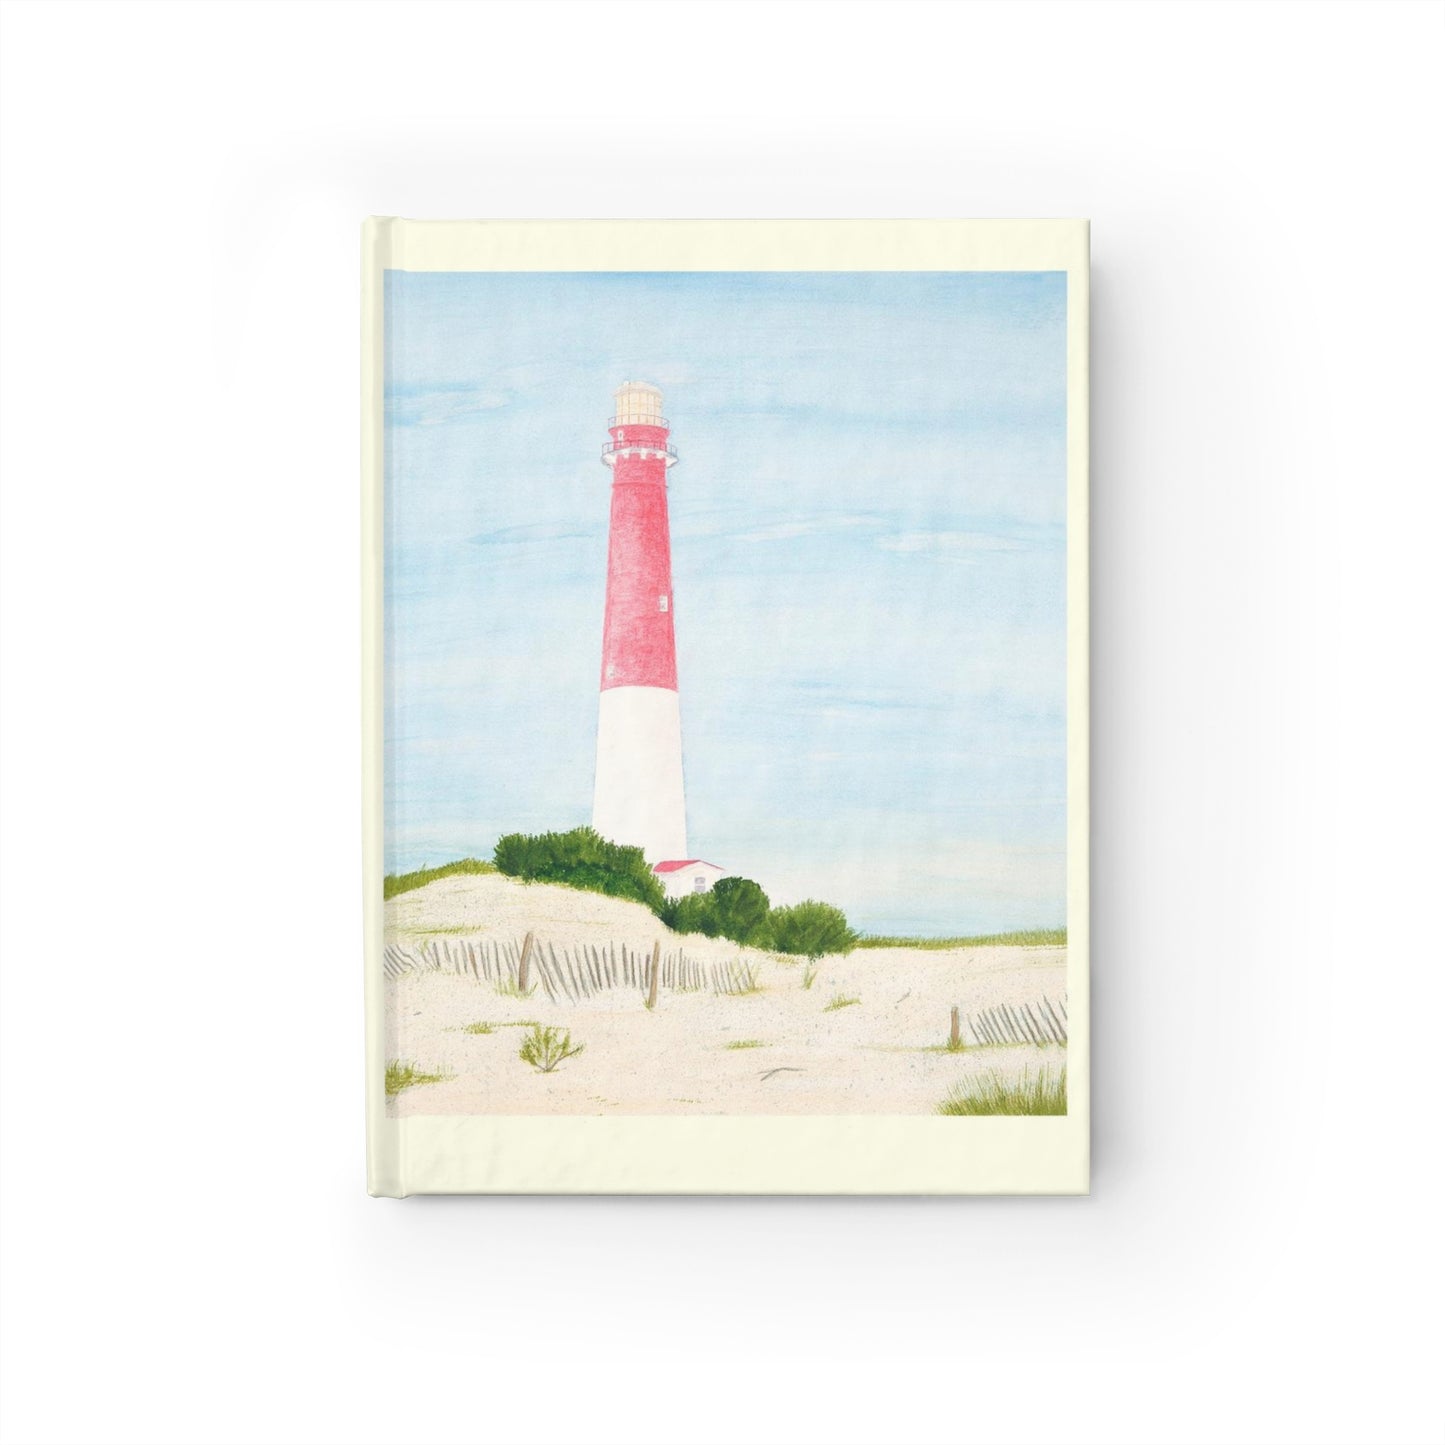 The Barnegat Lighthouse Lined Page Journal will keep your notes  on all the lighthouses you explore.